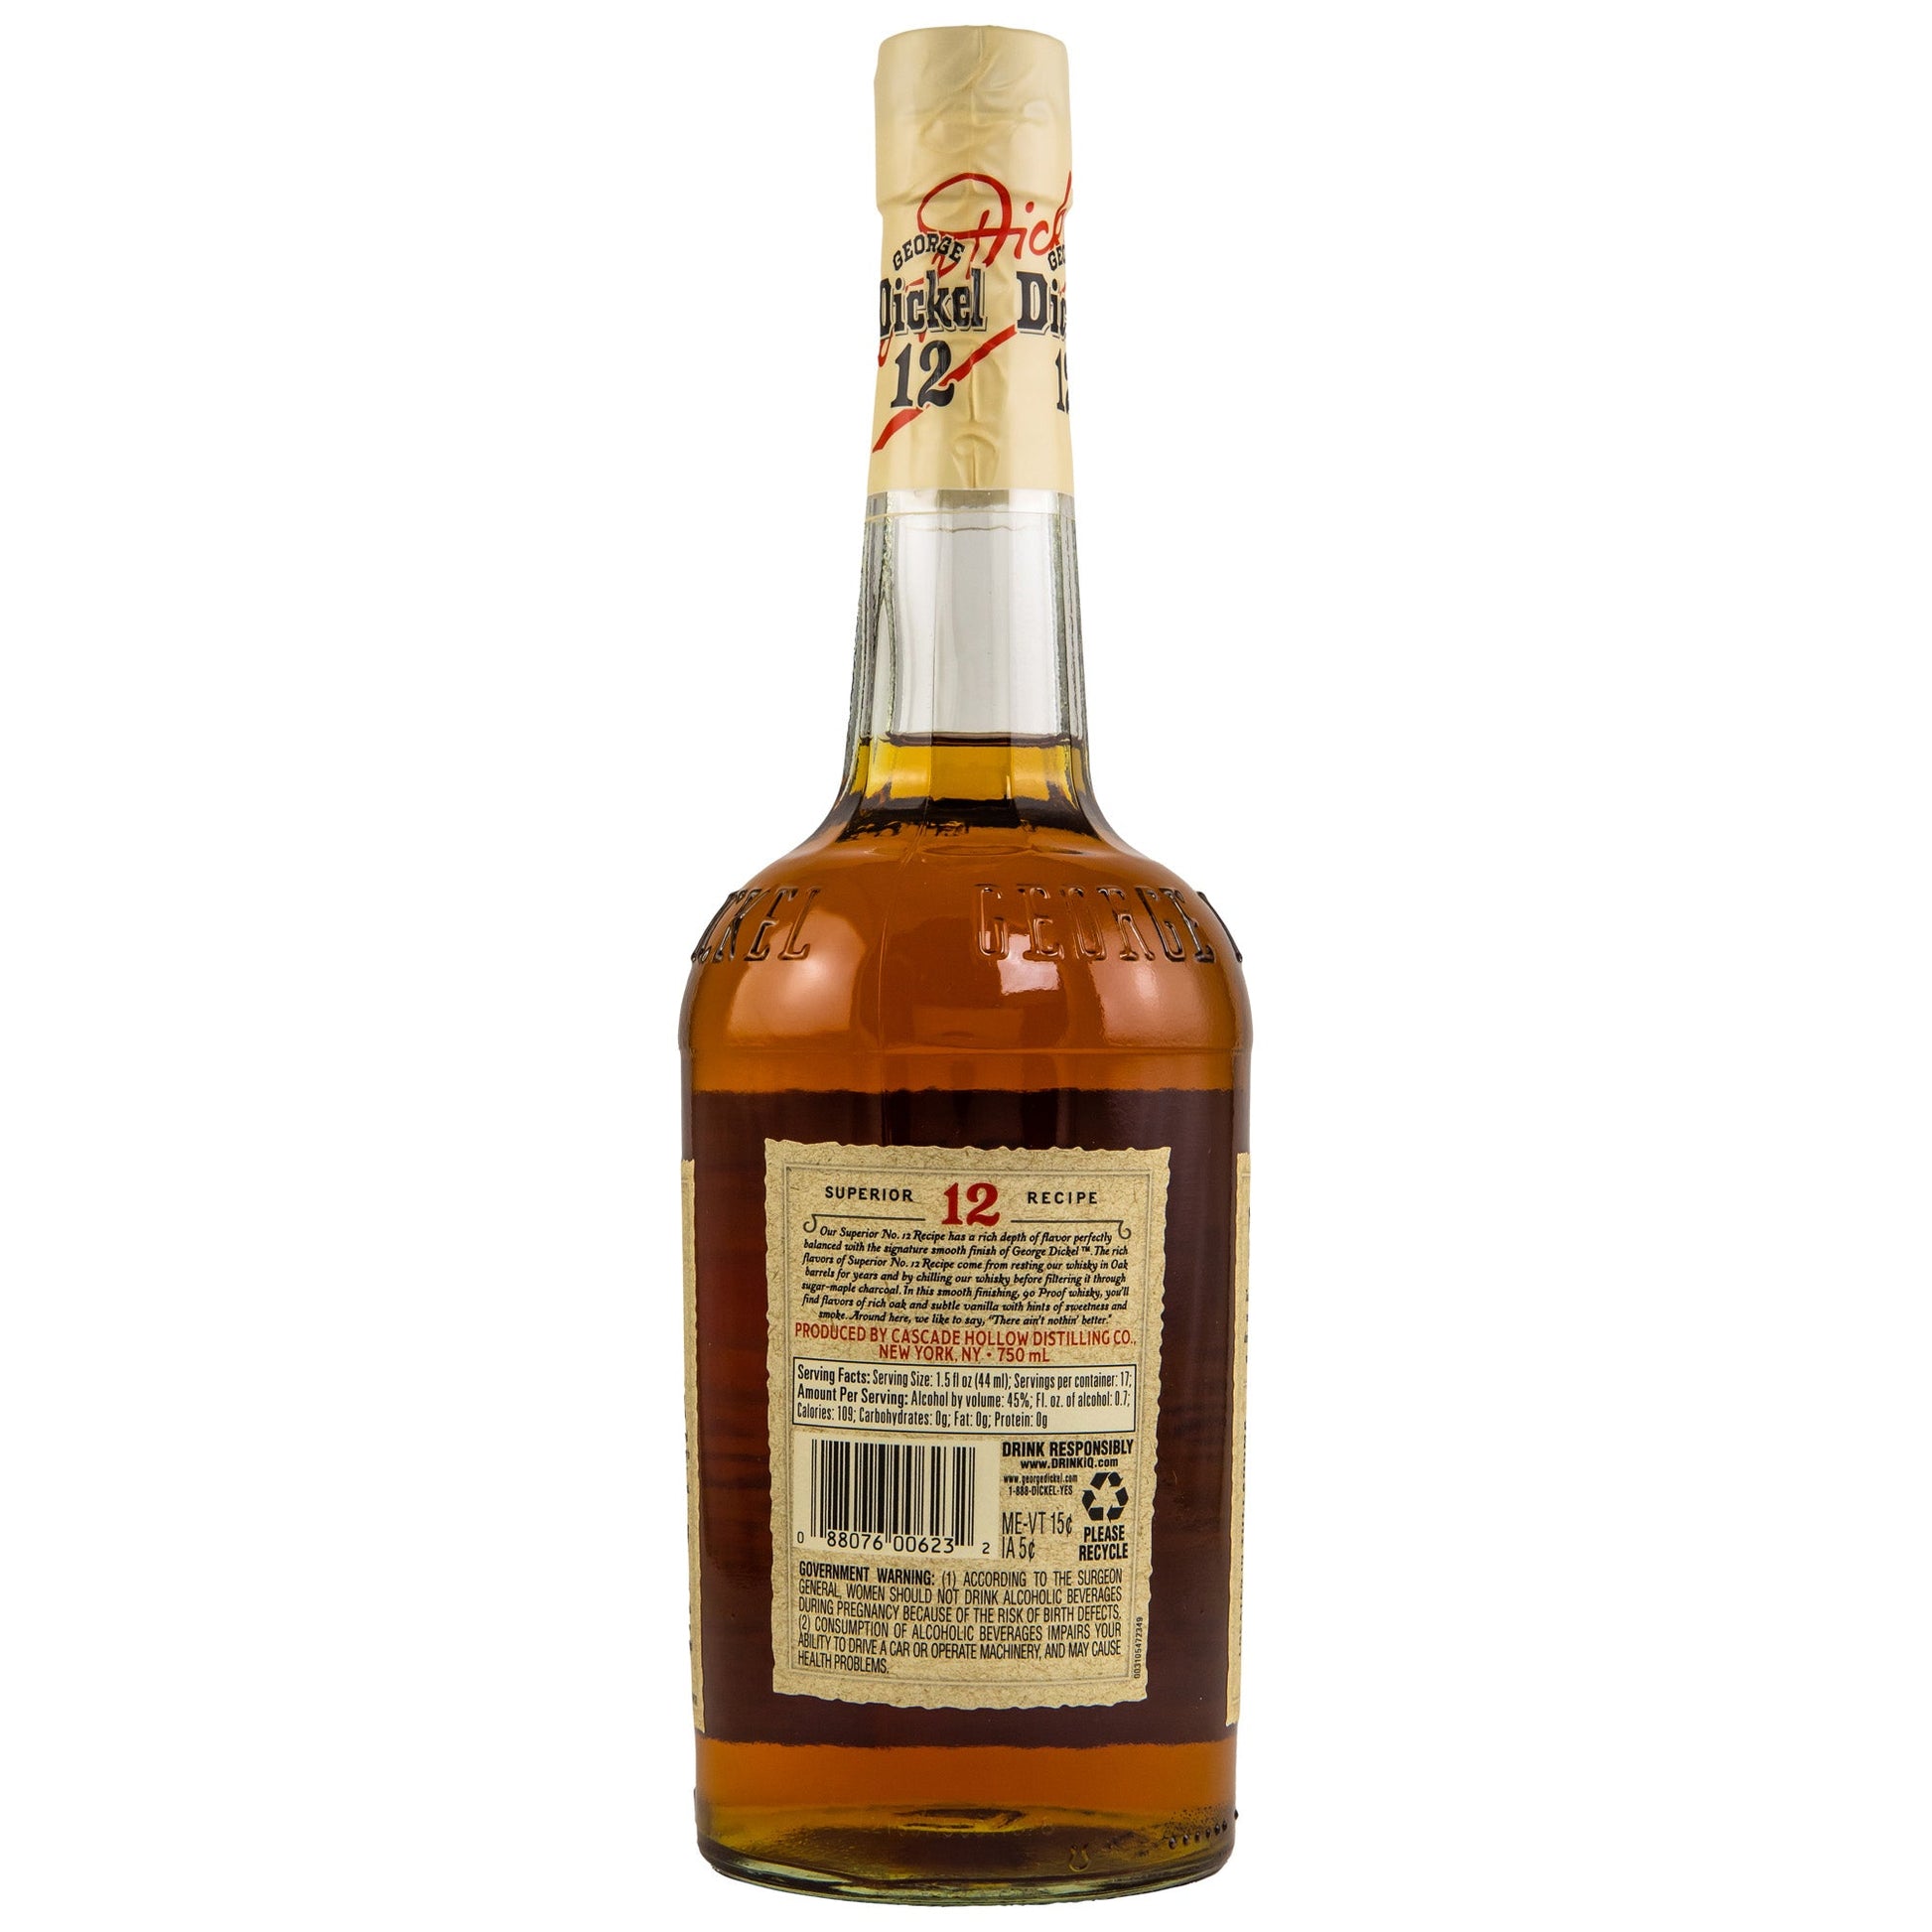 George Dickel No. 12 | Tennesse Sour Mash Whisky | 0,75l | 45%GET A BOTTLE